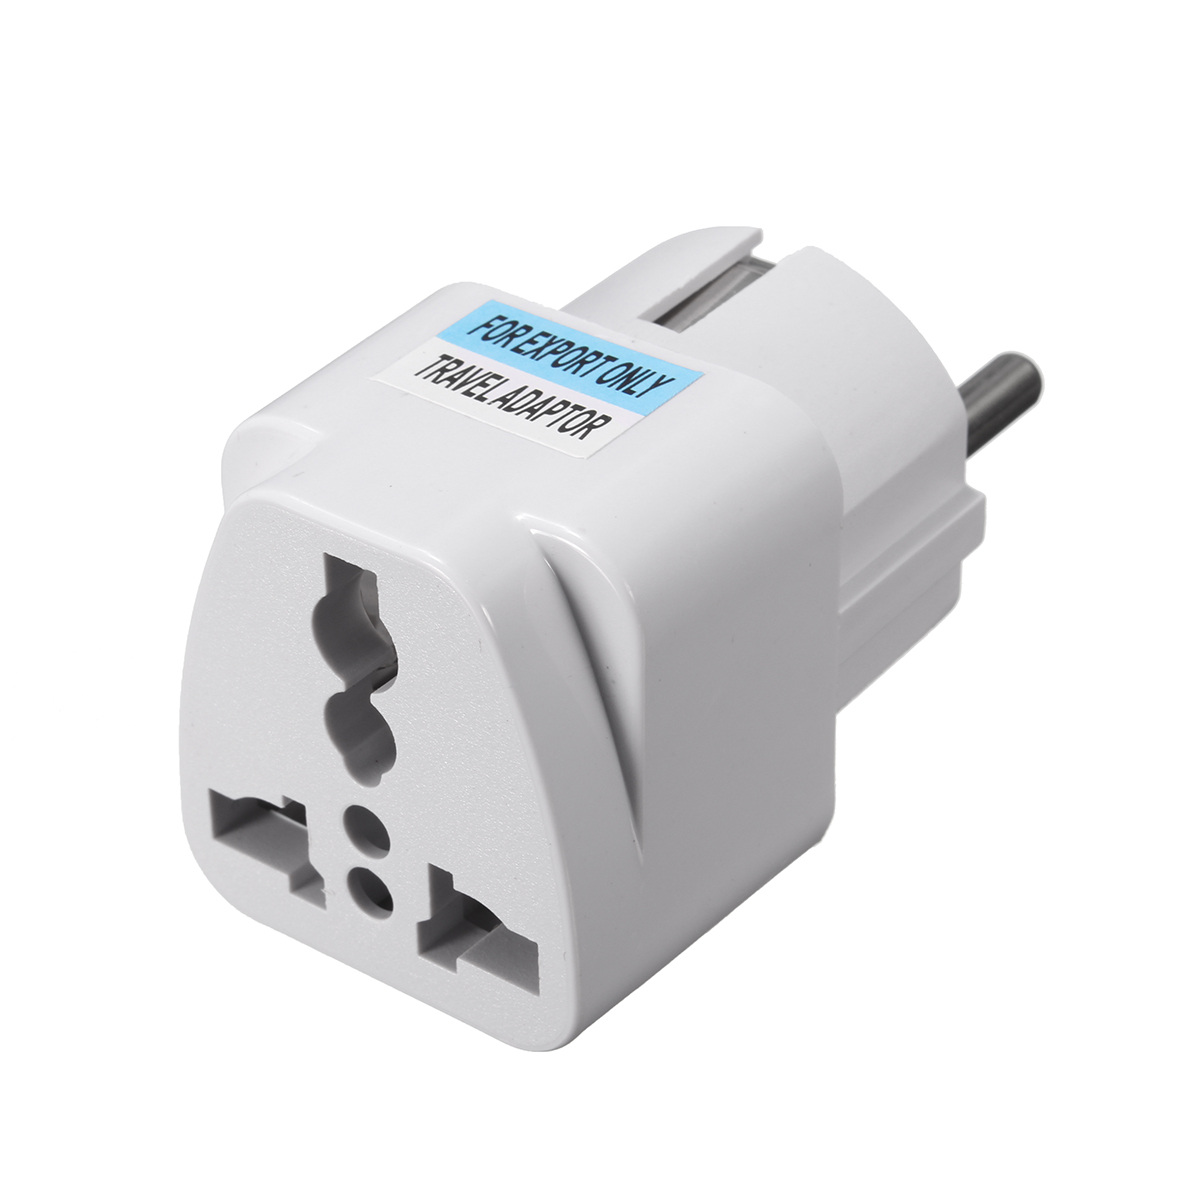 Find 5Pcs Travel Universal Power Outlet Adapter UK US EU AU to EU Plug Conversion Plug Socket Converter Connector for Sale on Gipsybee.com with cryptocurrencies